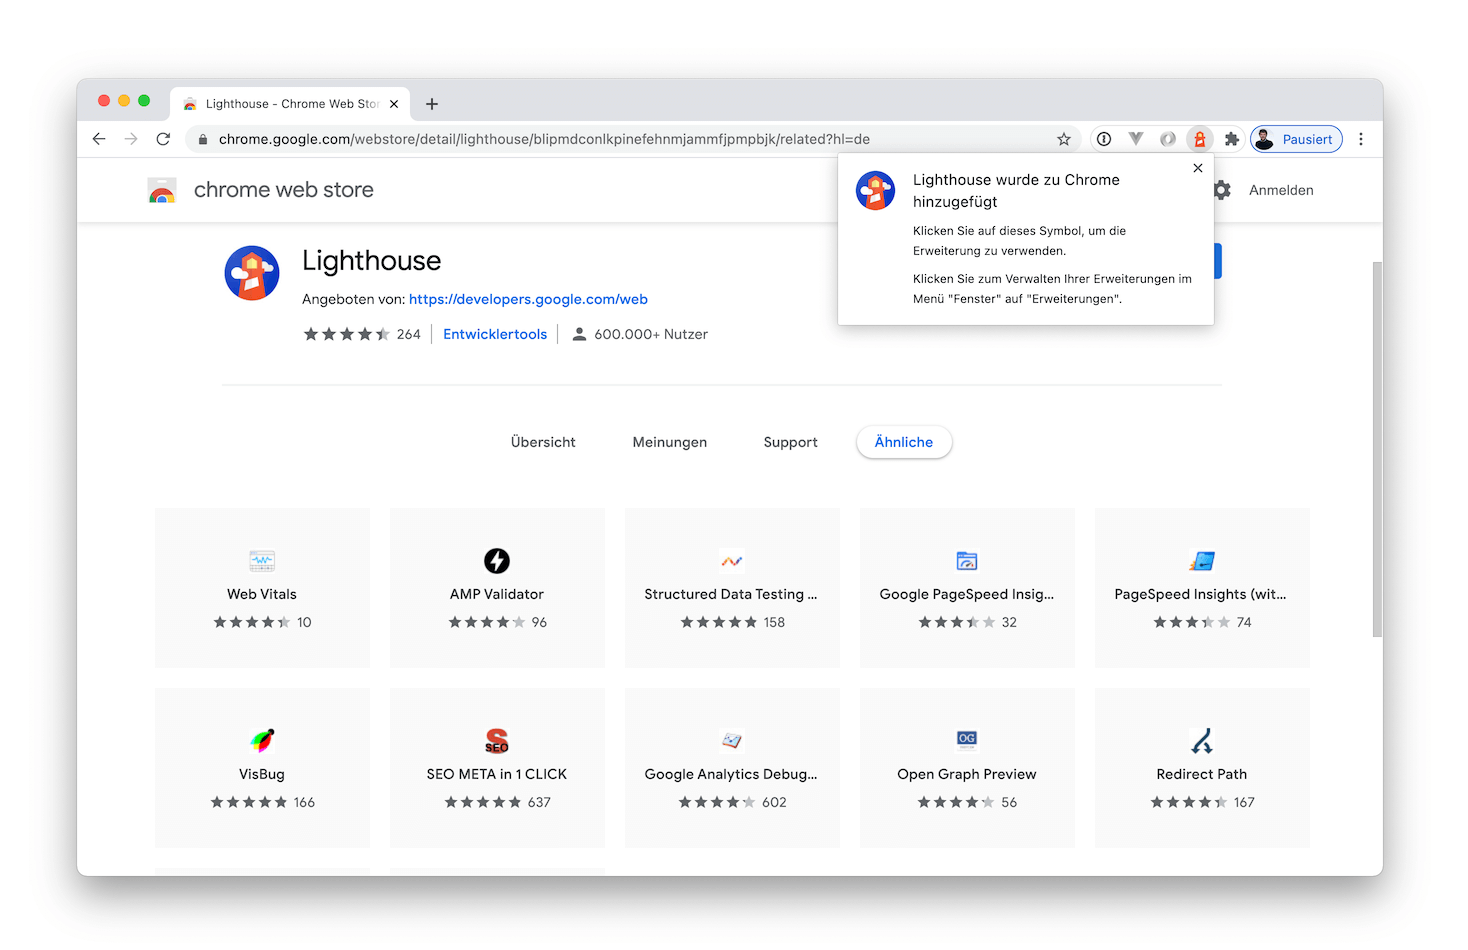 Screenshot after adding Lighthouse in Chrome